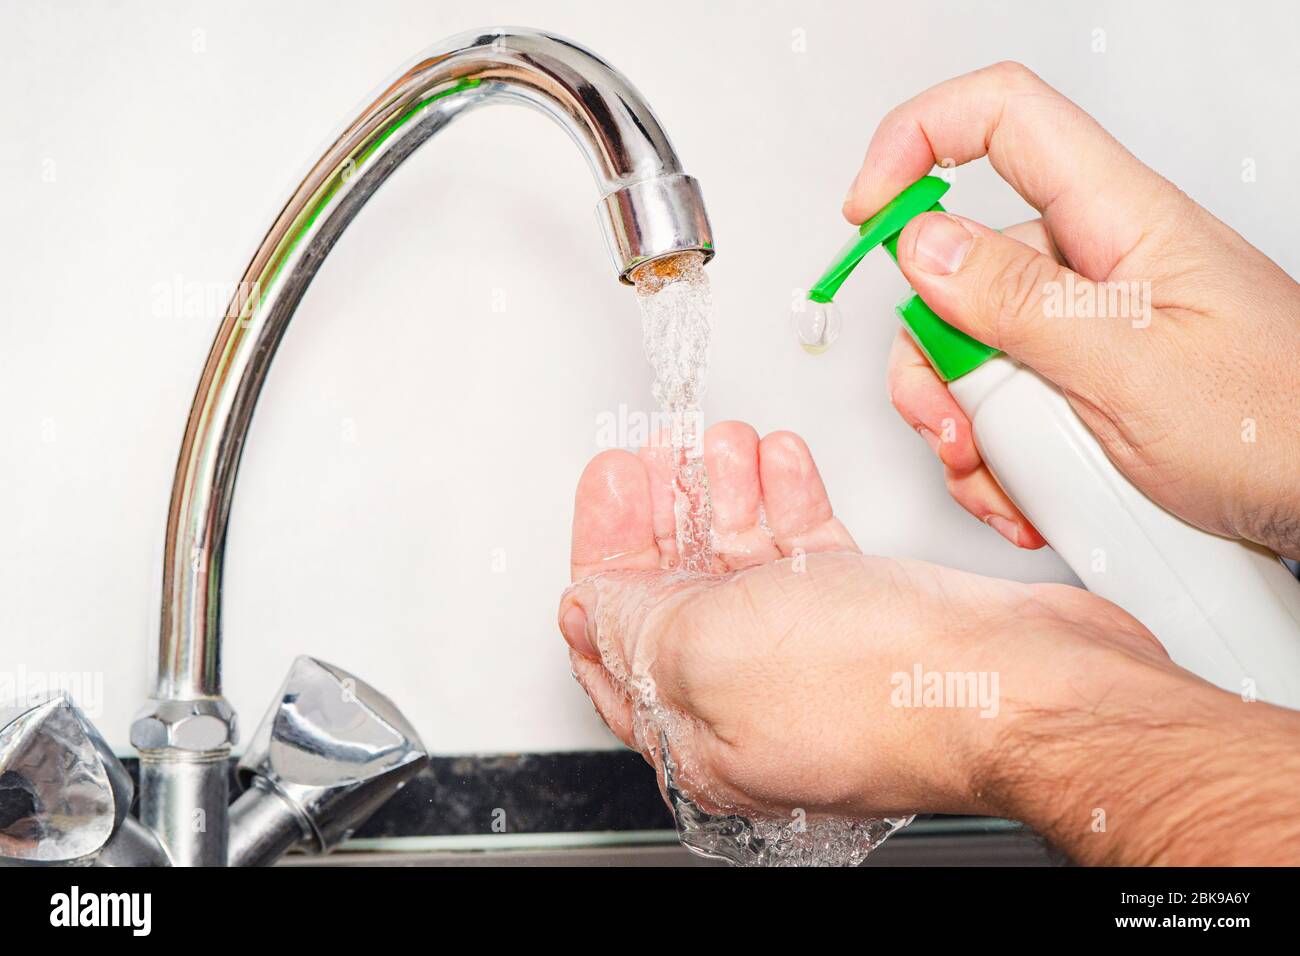 Man helping himself to a dollop of antibacterial soap, close up of hands. Washing hands rubbing with soap man for winter flu virus prevention, hygiene Stock Photo